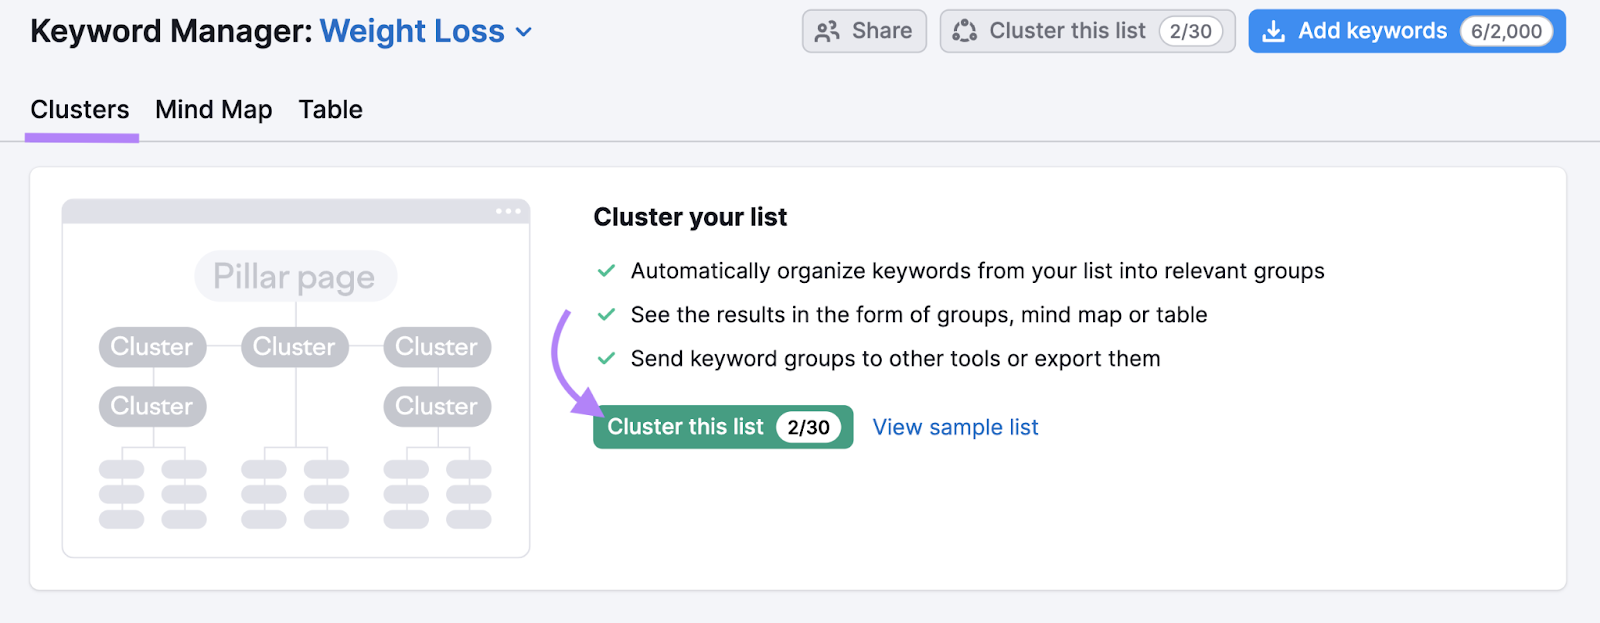 cluster this database  fastener  successful  Keyword Manager tool